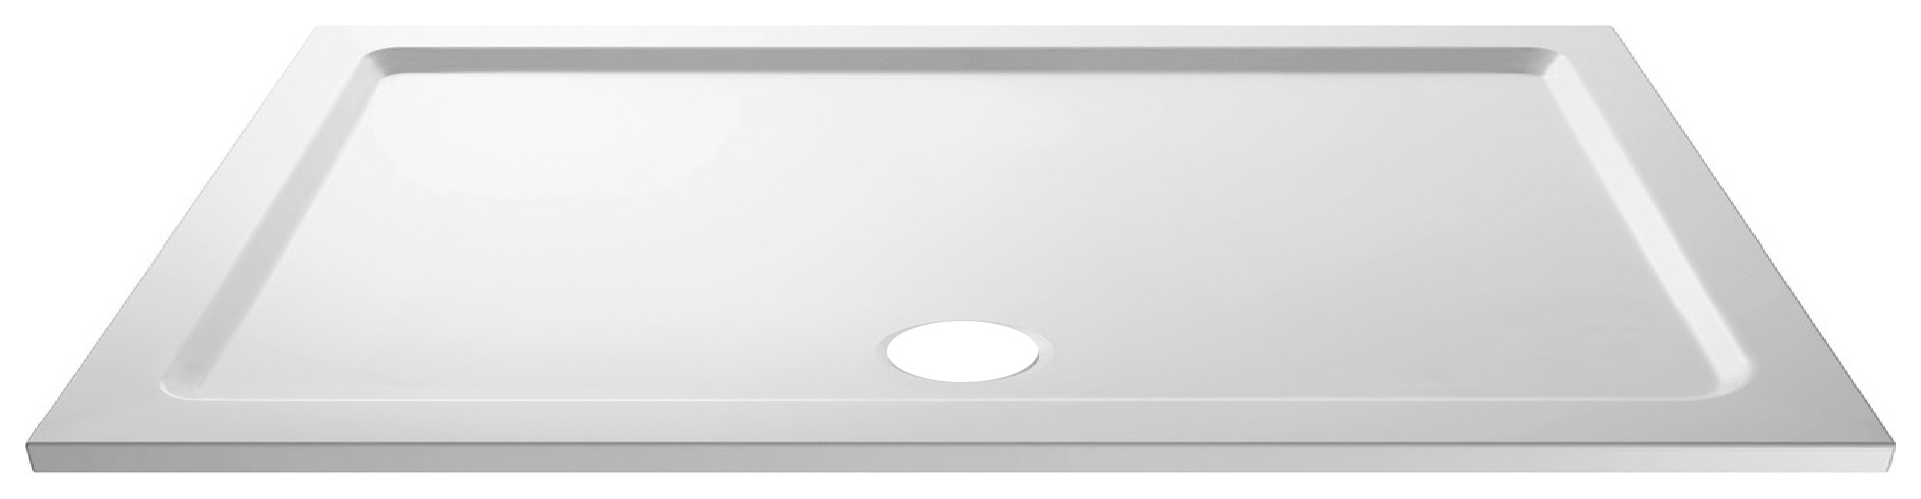 Image of Wickes 40mm Pearlstone Rectangular Shower Tray - 1700 x 900mm